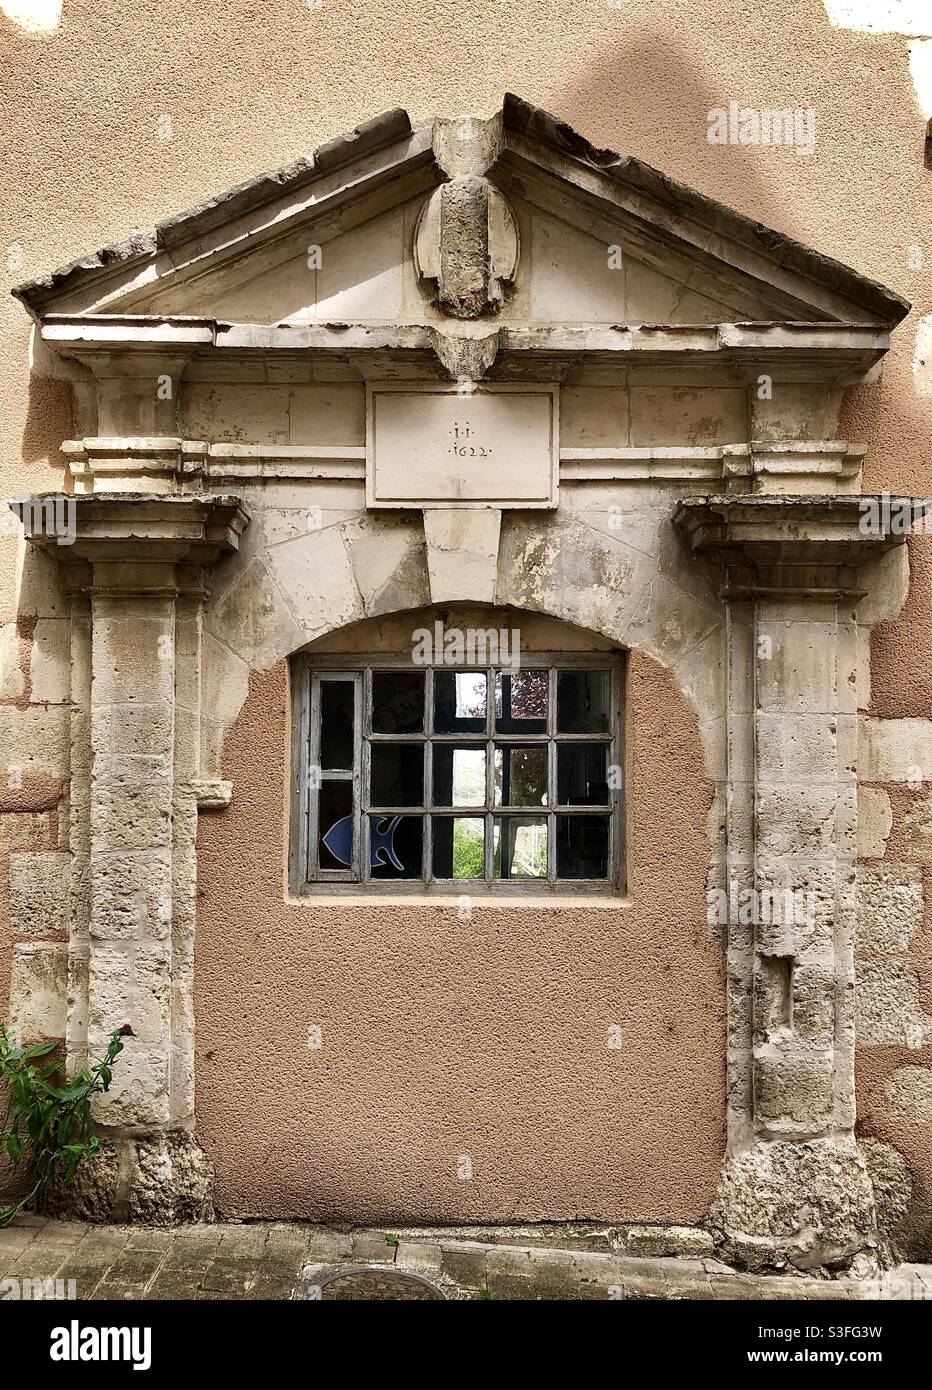 Ornate 17th century doorway blocked in modern times for a window - Le Blanc, Indre (36), France. Stock Photo